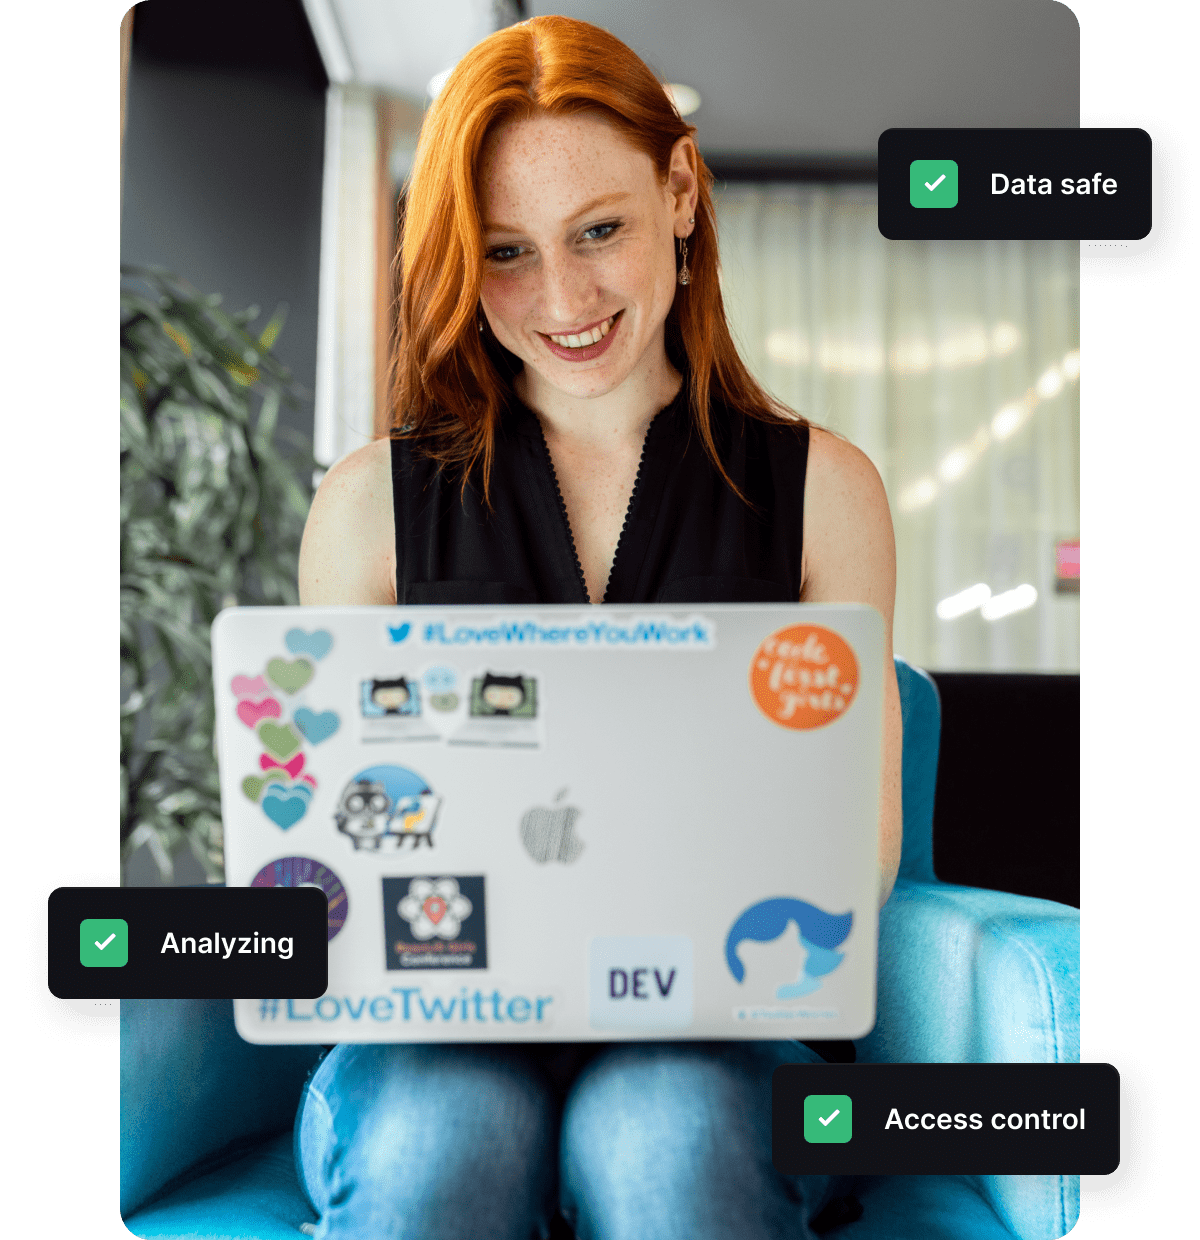 Smiling redhaired woman using laptop adorned with stickers enjoying an online event without worrying about her security and privacy settings